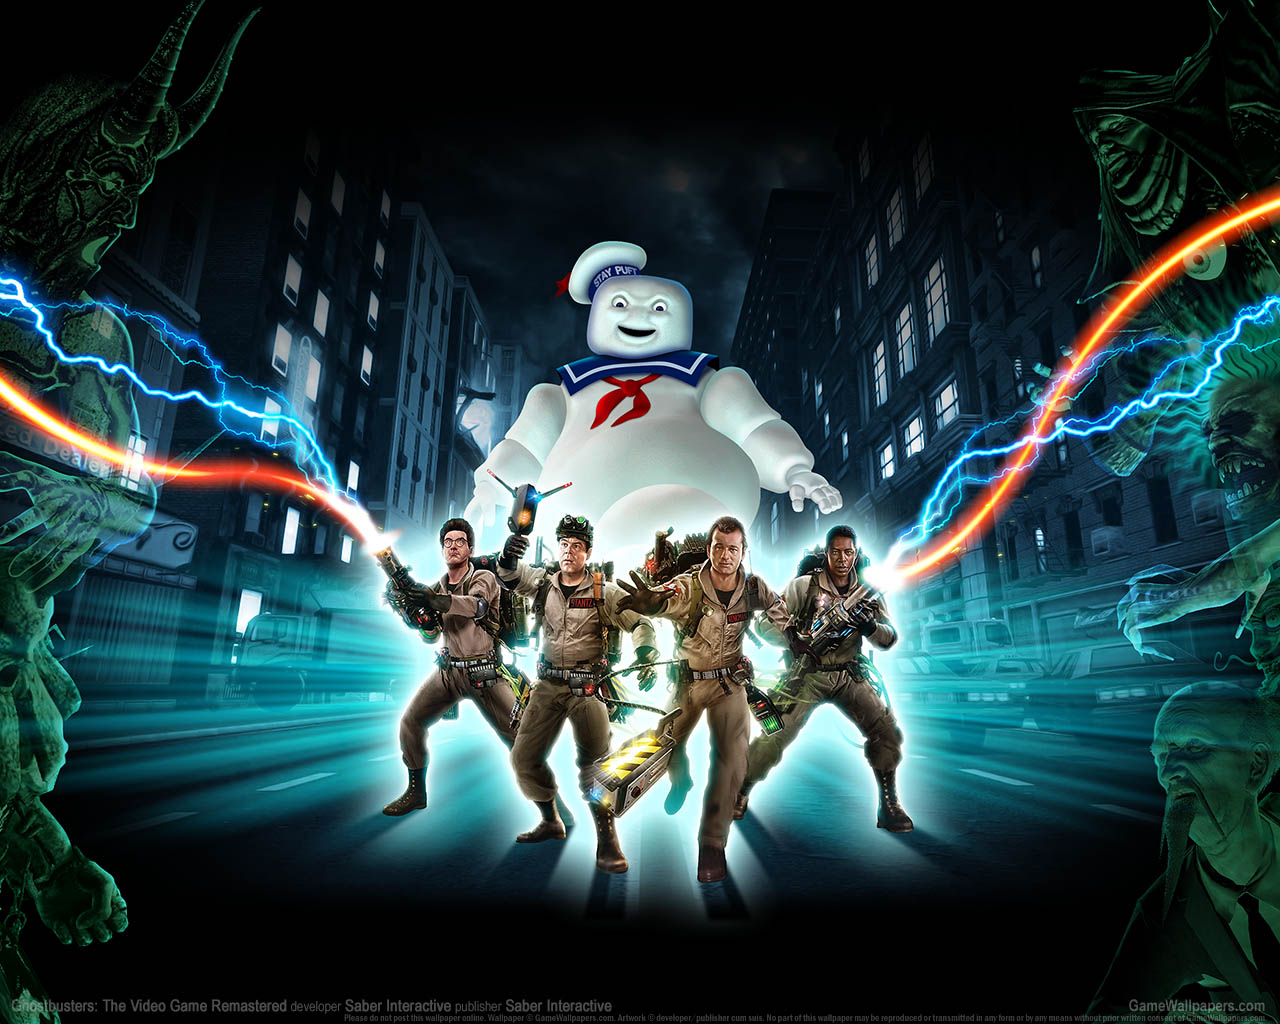 Ghostbusters%3A The Video Game Remastered wallpaper 01 1280x1024